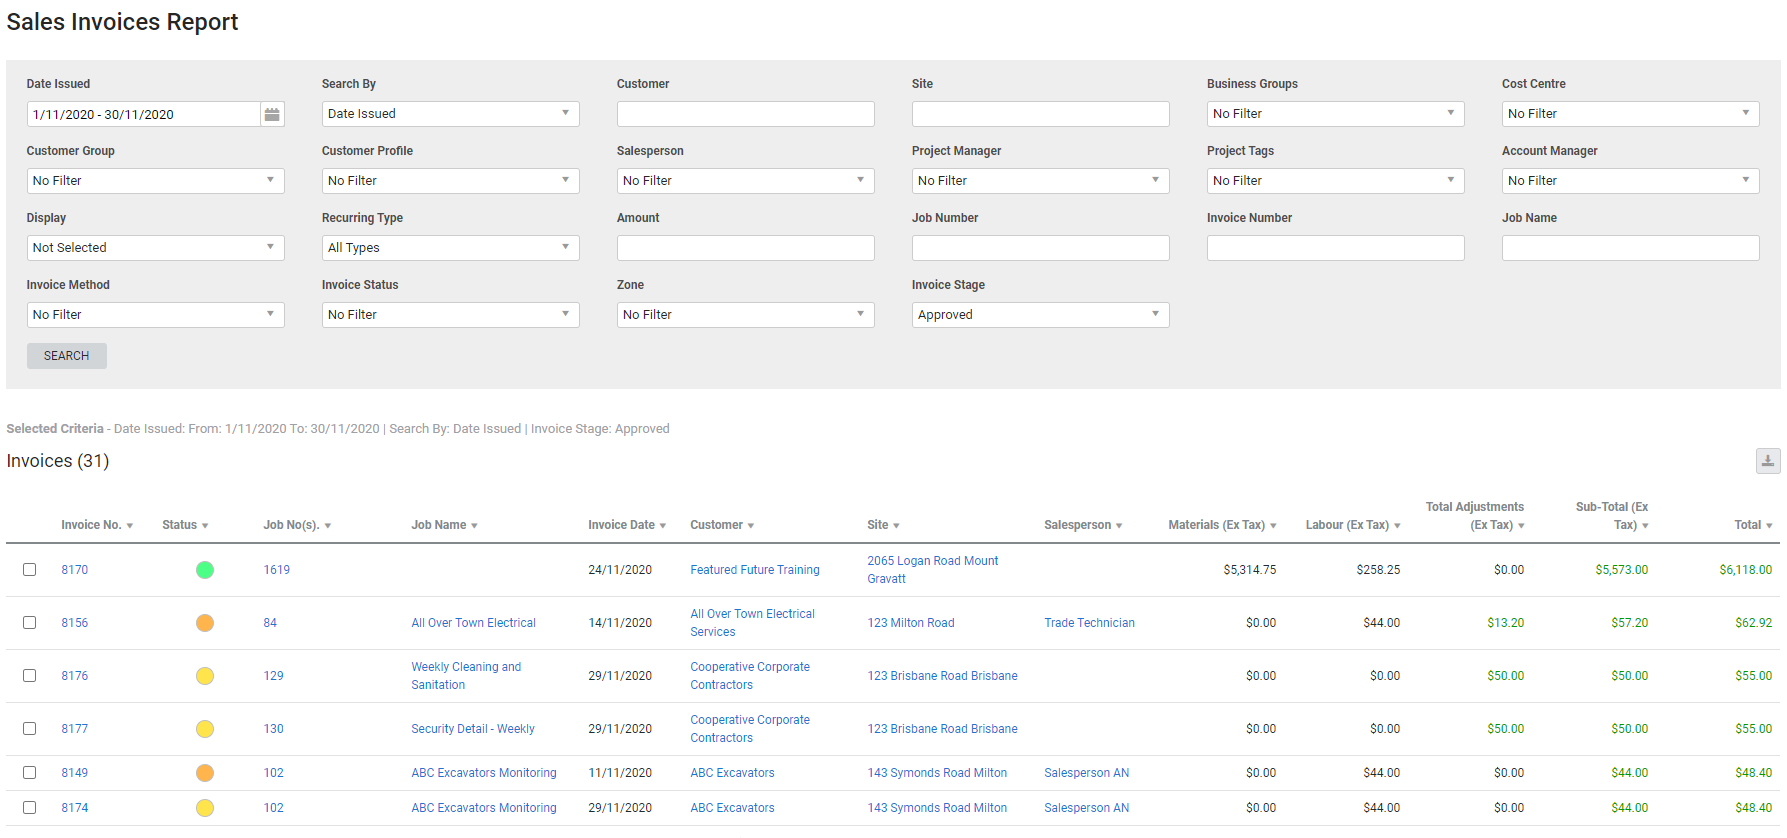 A screenshot of the Sales Invoices report.